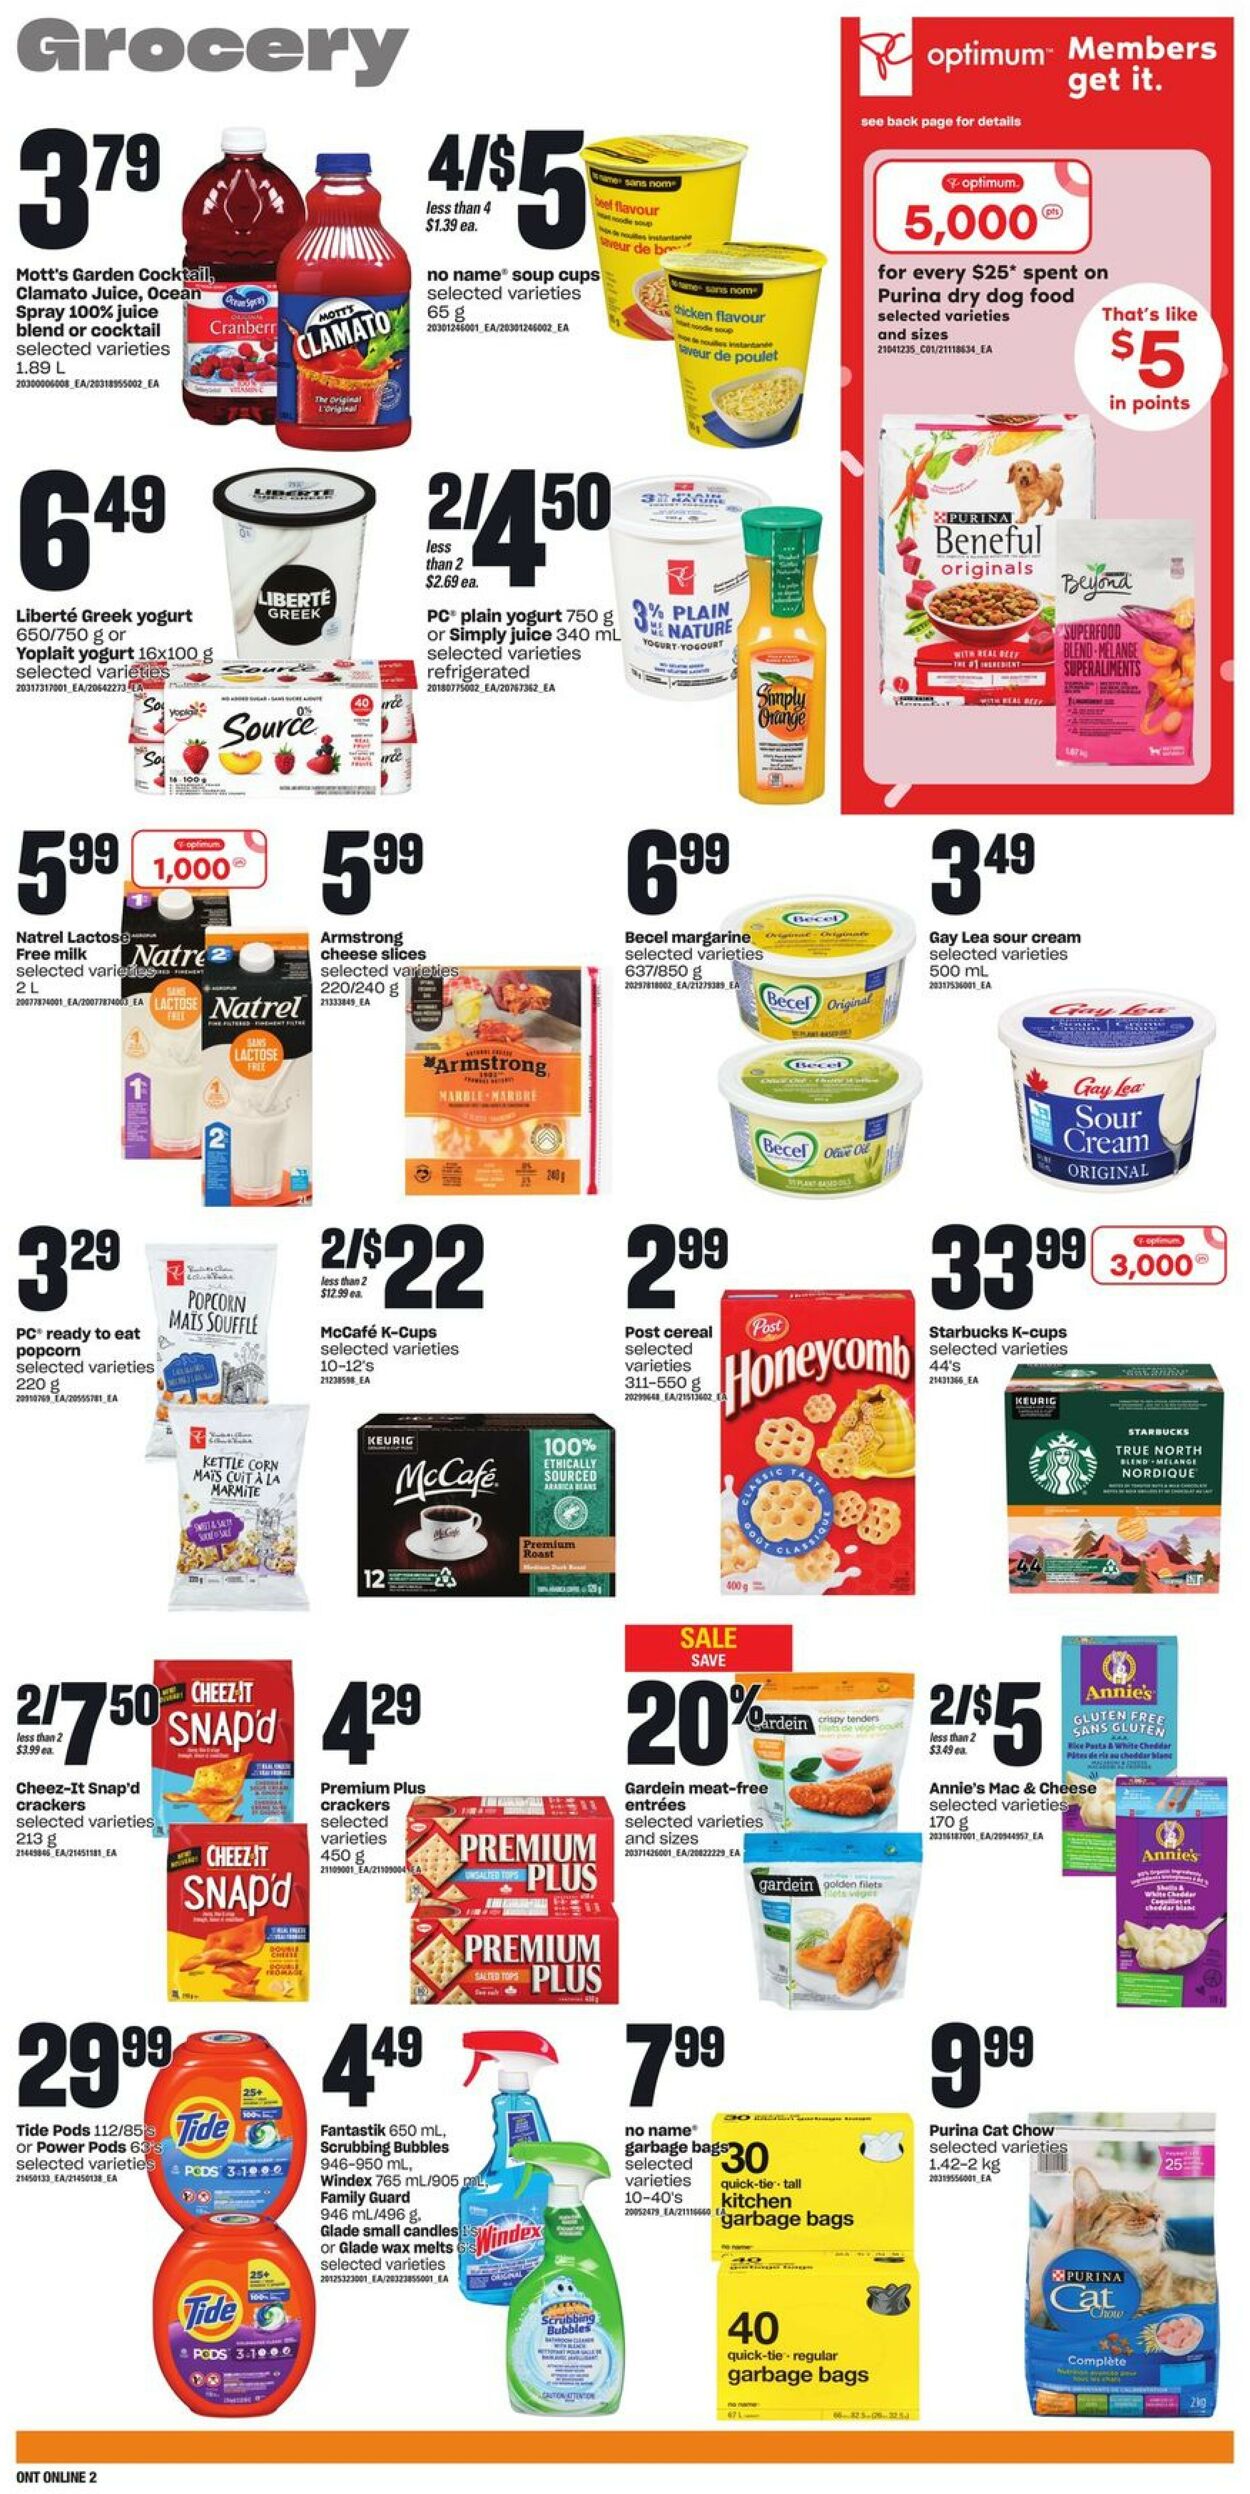 Zehrs Flyer from 03/23/2023